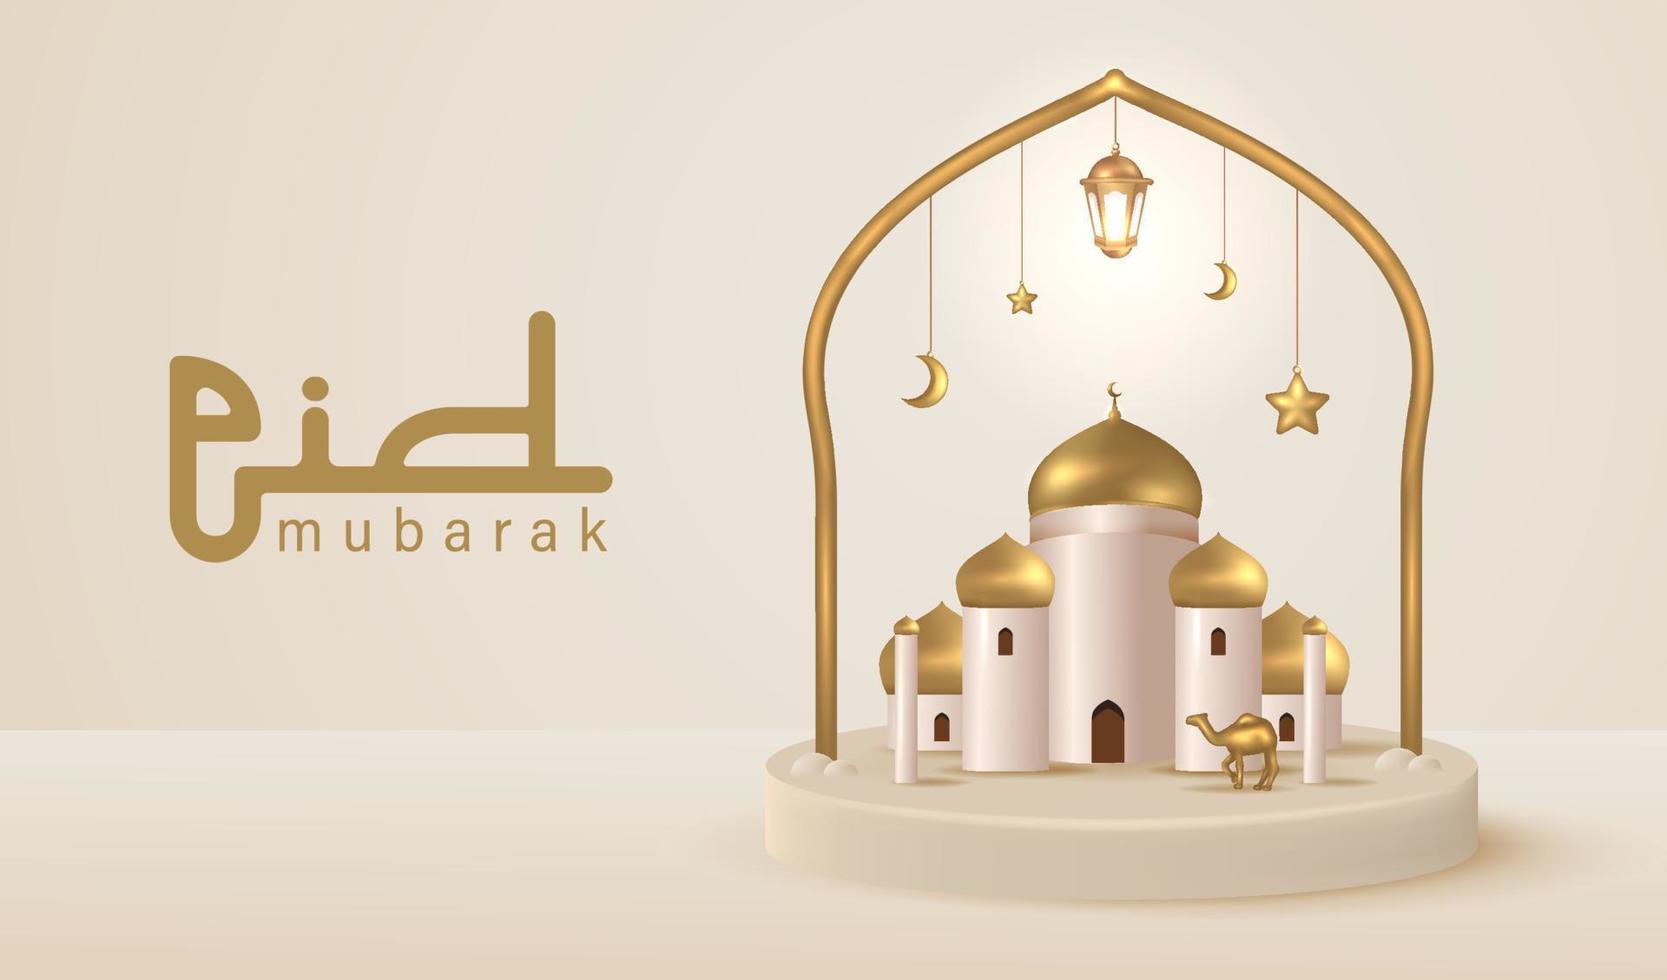 Illustration of 3D Realistic Golden Dome Mosque in Arabian Window Style for Eid Mubarak Template Vector Illustration, Mini Mosque 3D on Round Podium with One Color Background